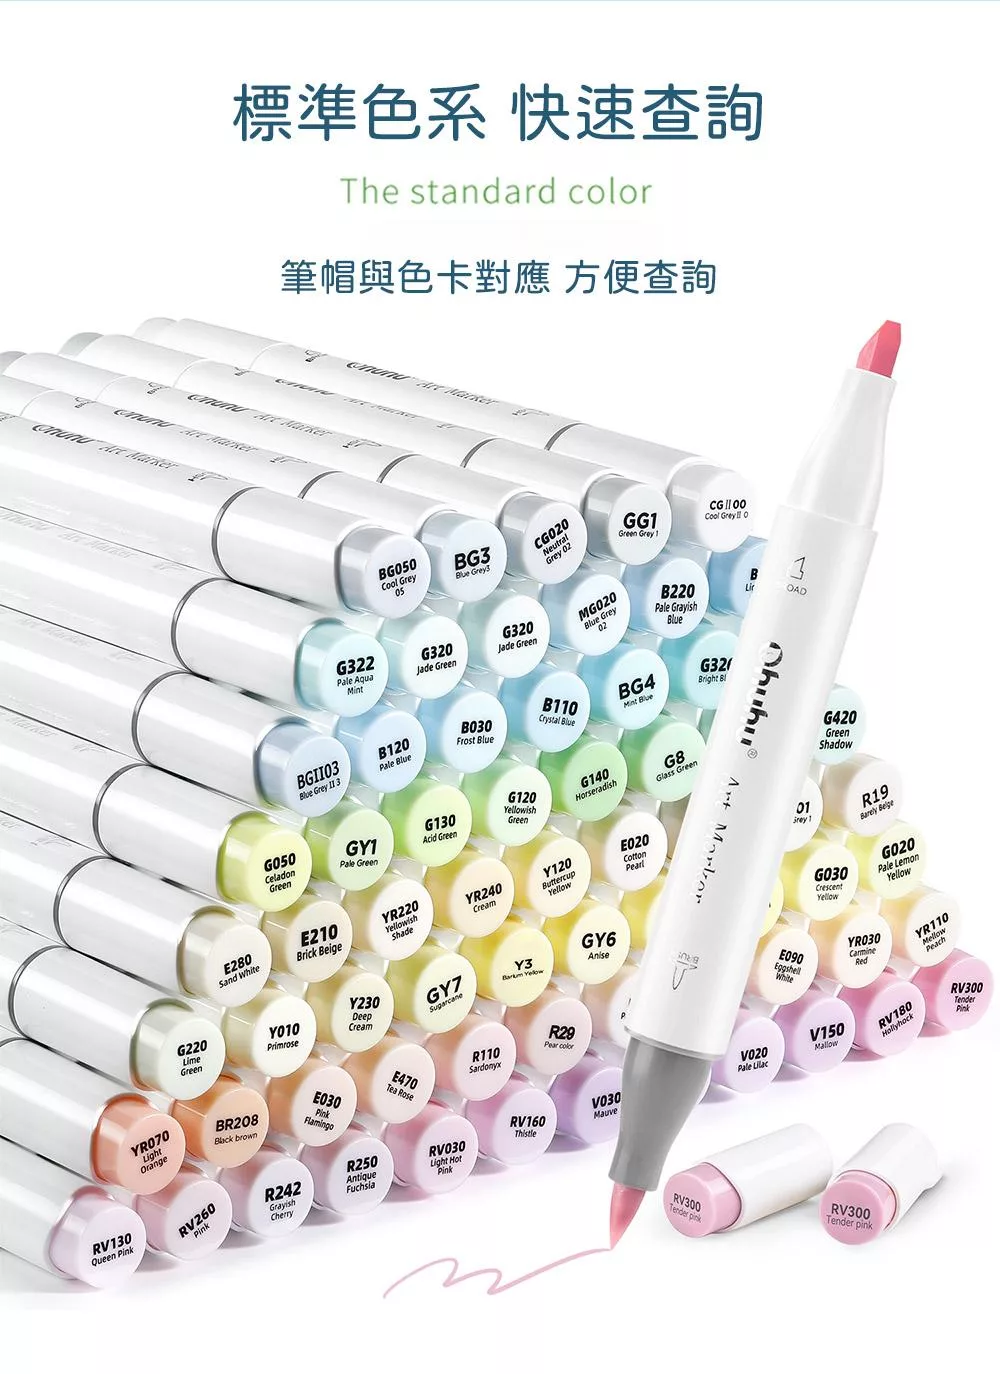 Ohuhu Dual Tips Pastel Alcohol Marerks are Available Now!